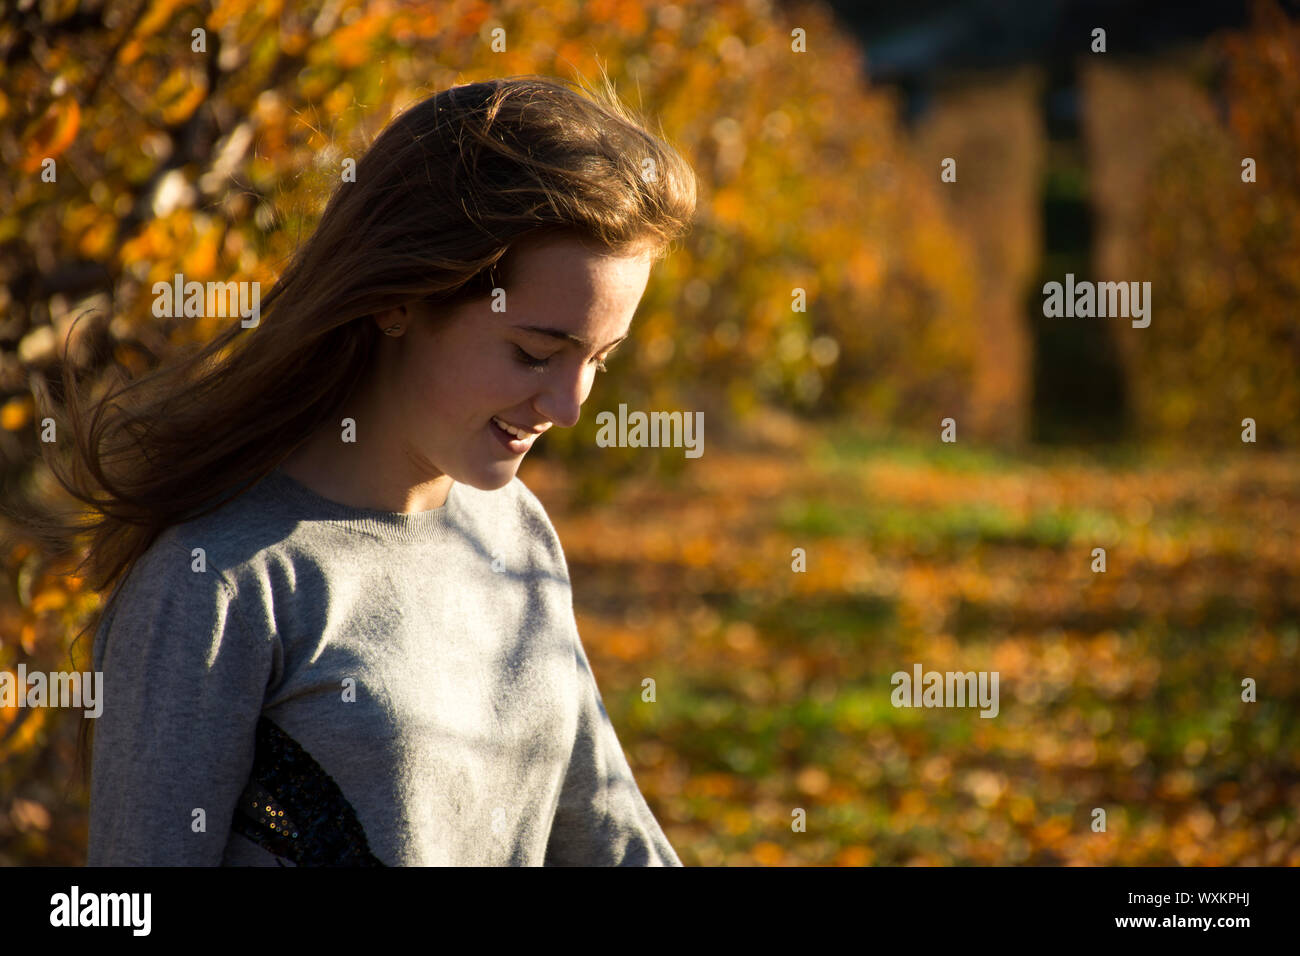 Beautiful young woman red-haired posing in an autumn field. Trees with oranges and golden leaves. Sunny and day. Stock Photo